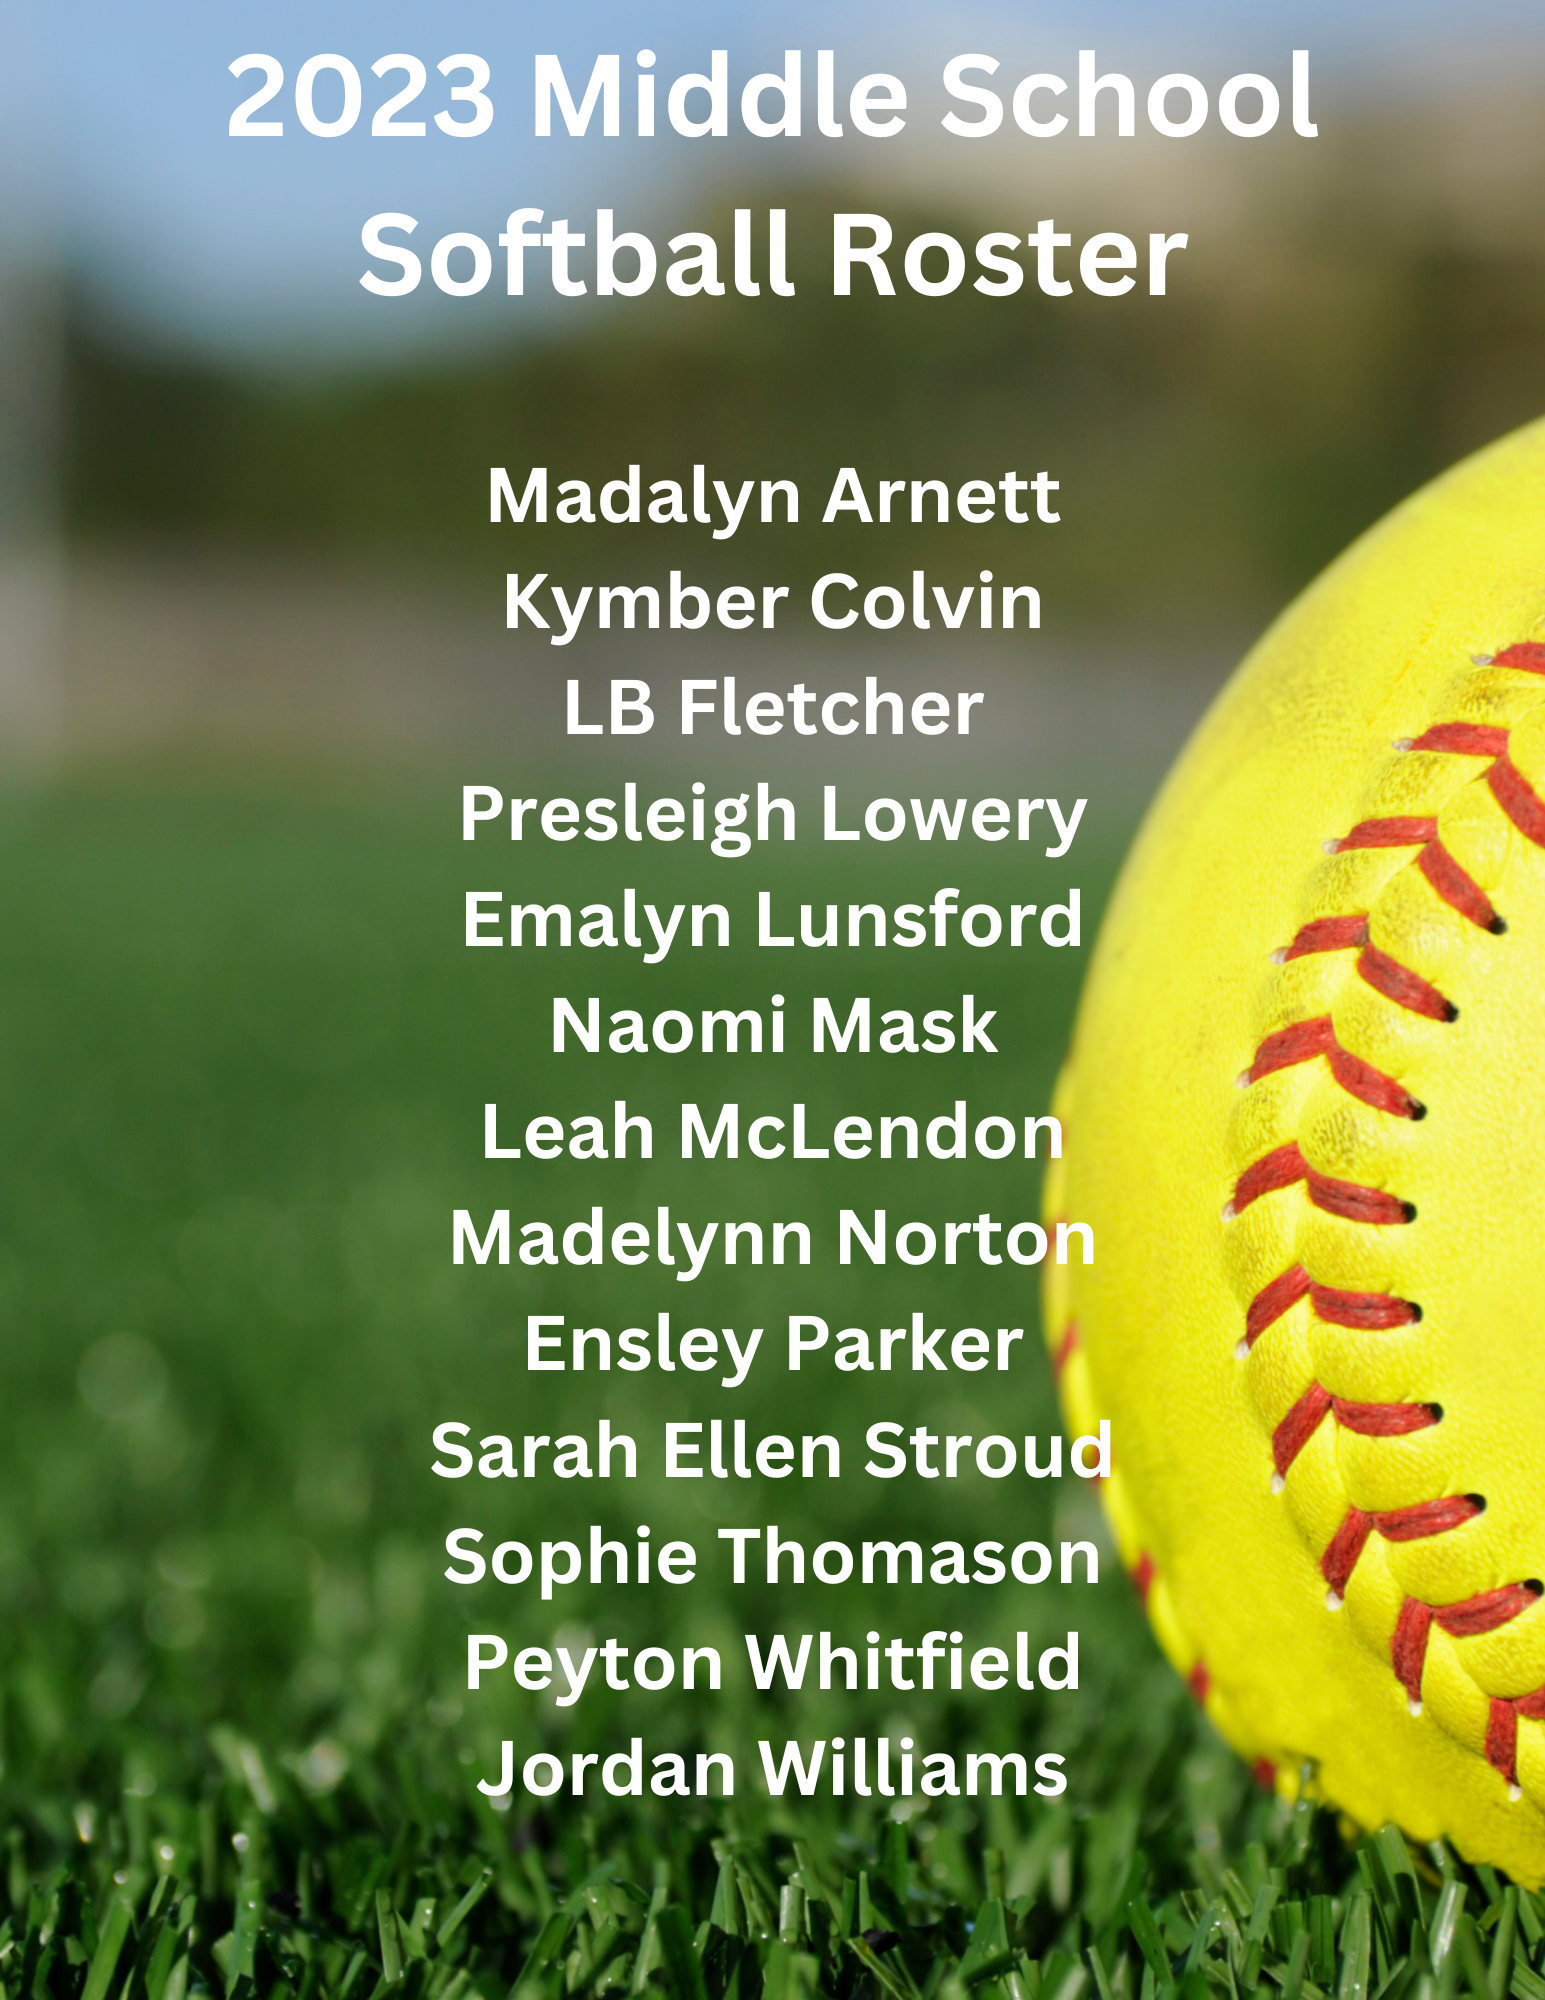 a picture of a softball with the names of the players on it